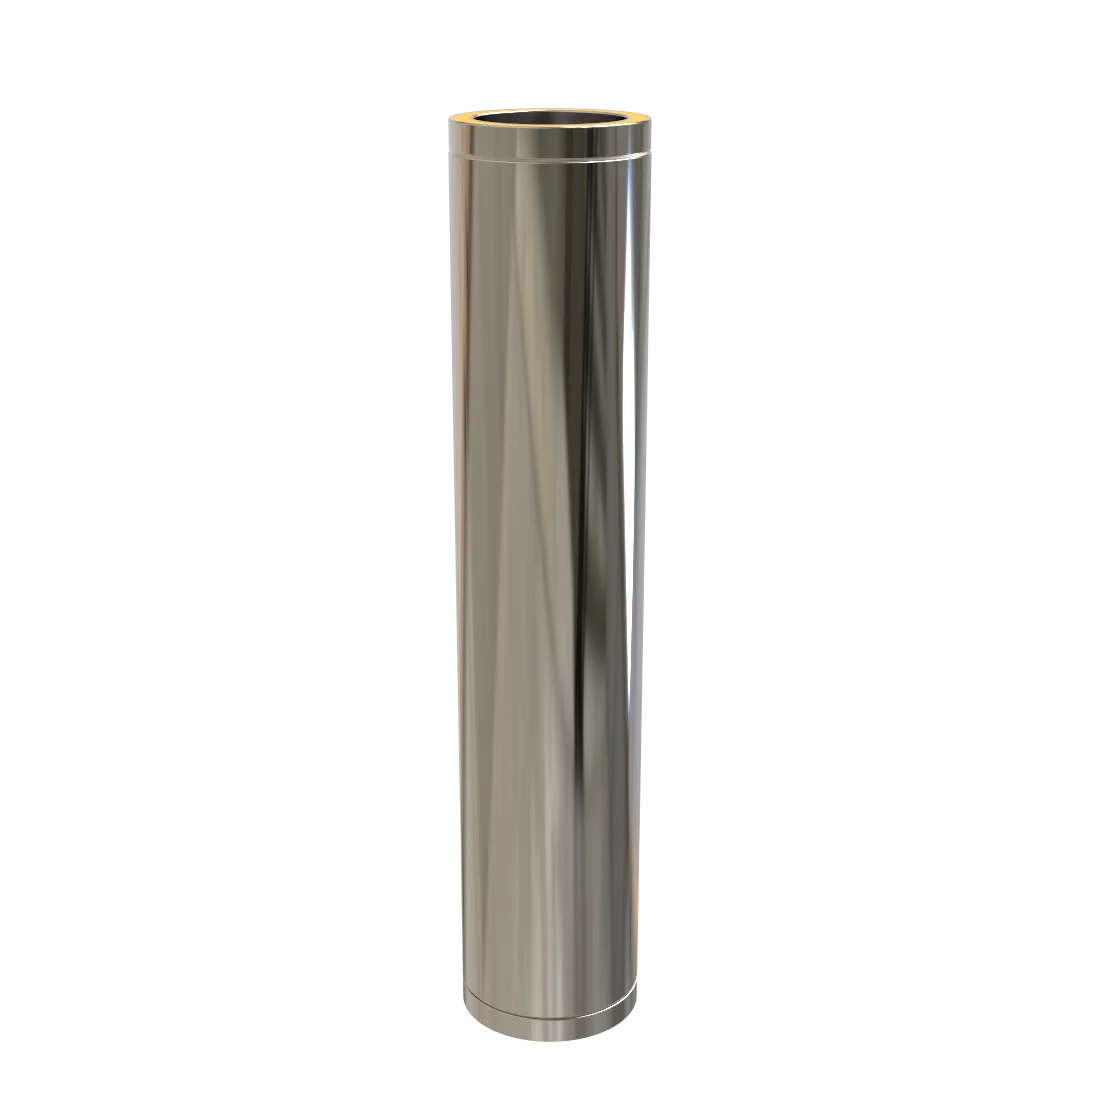 DOUBLE WALL FLUE PIPE - Made of Stainless Steel - AVANT KW